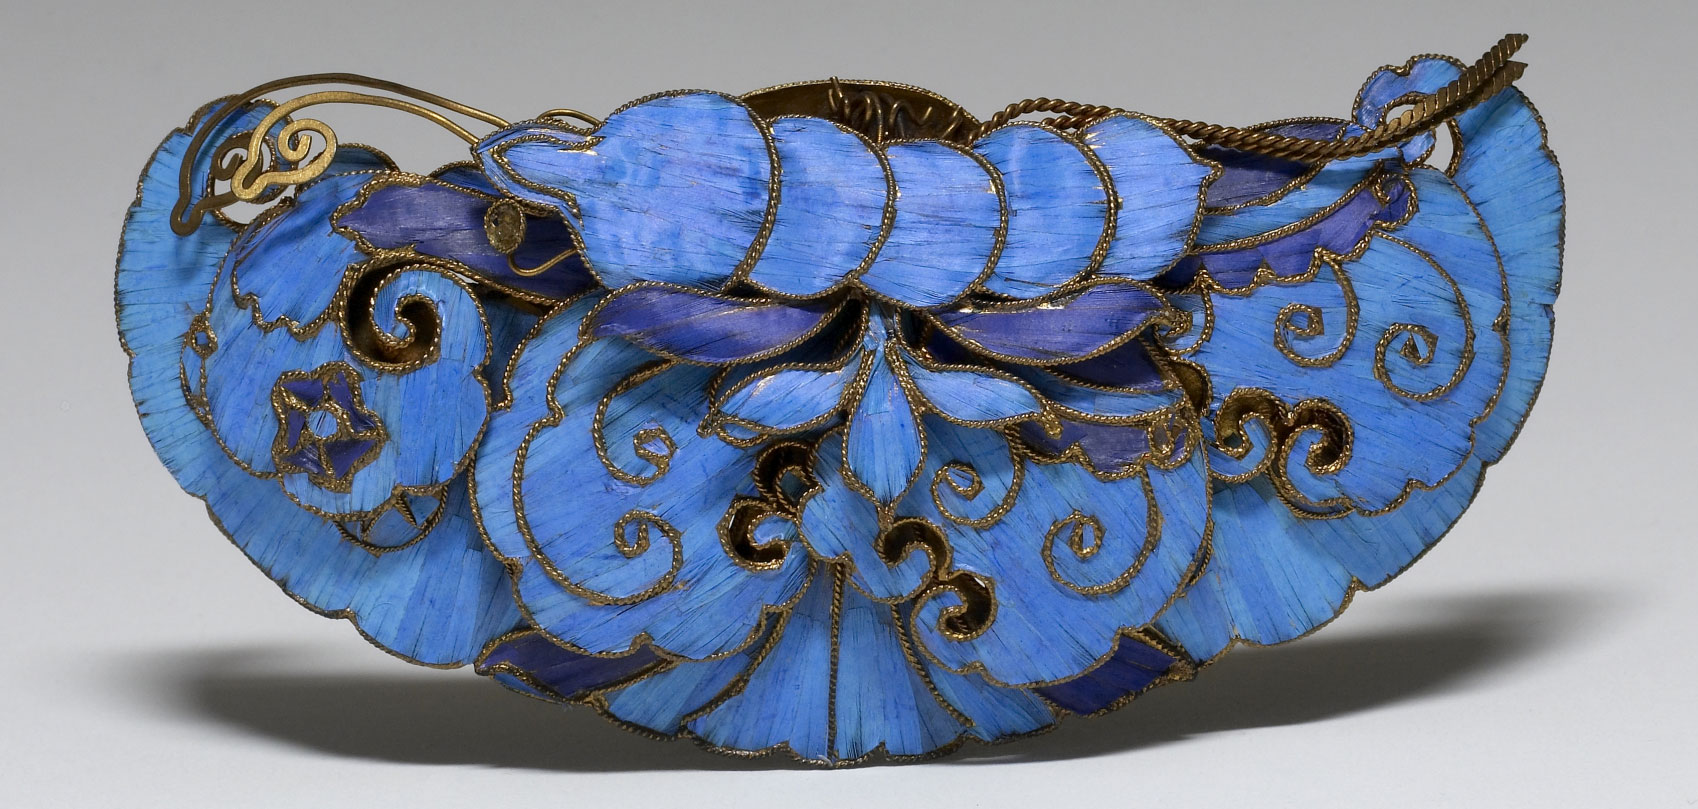 A Chinese hair ornament from about 1800 to 1900 inlaid with blue kingfisher feathers.